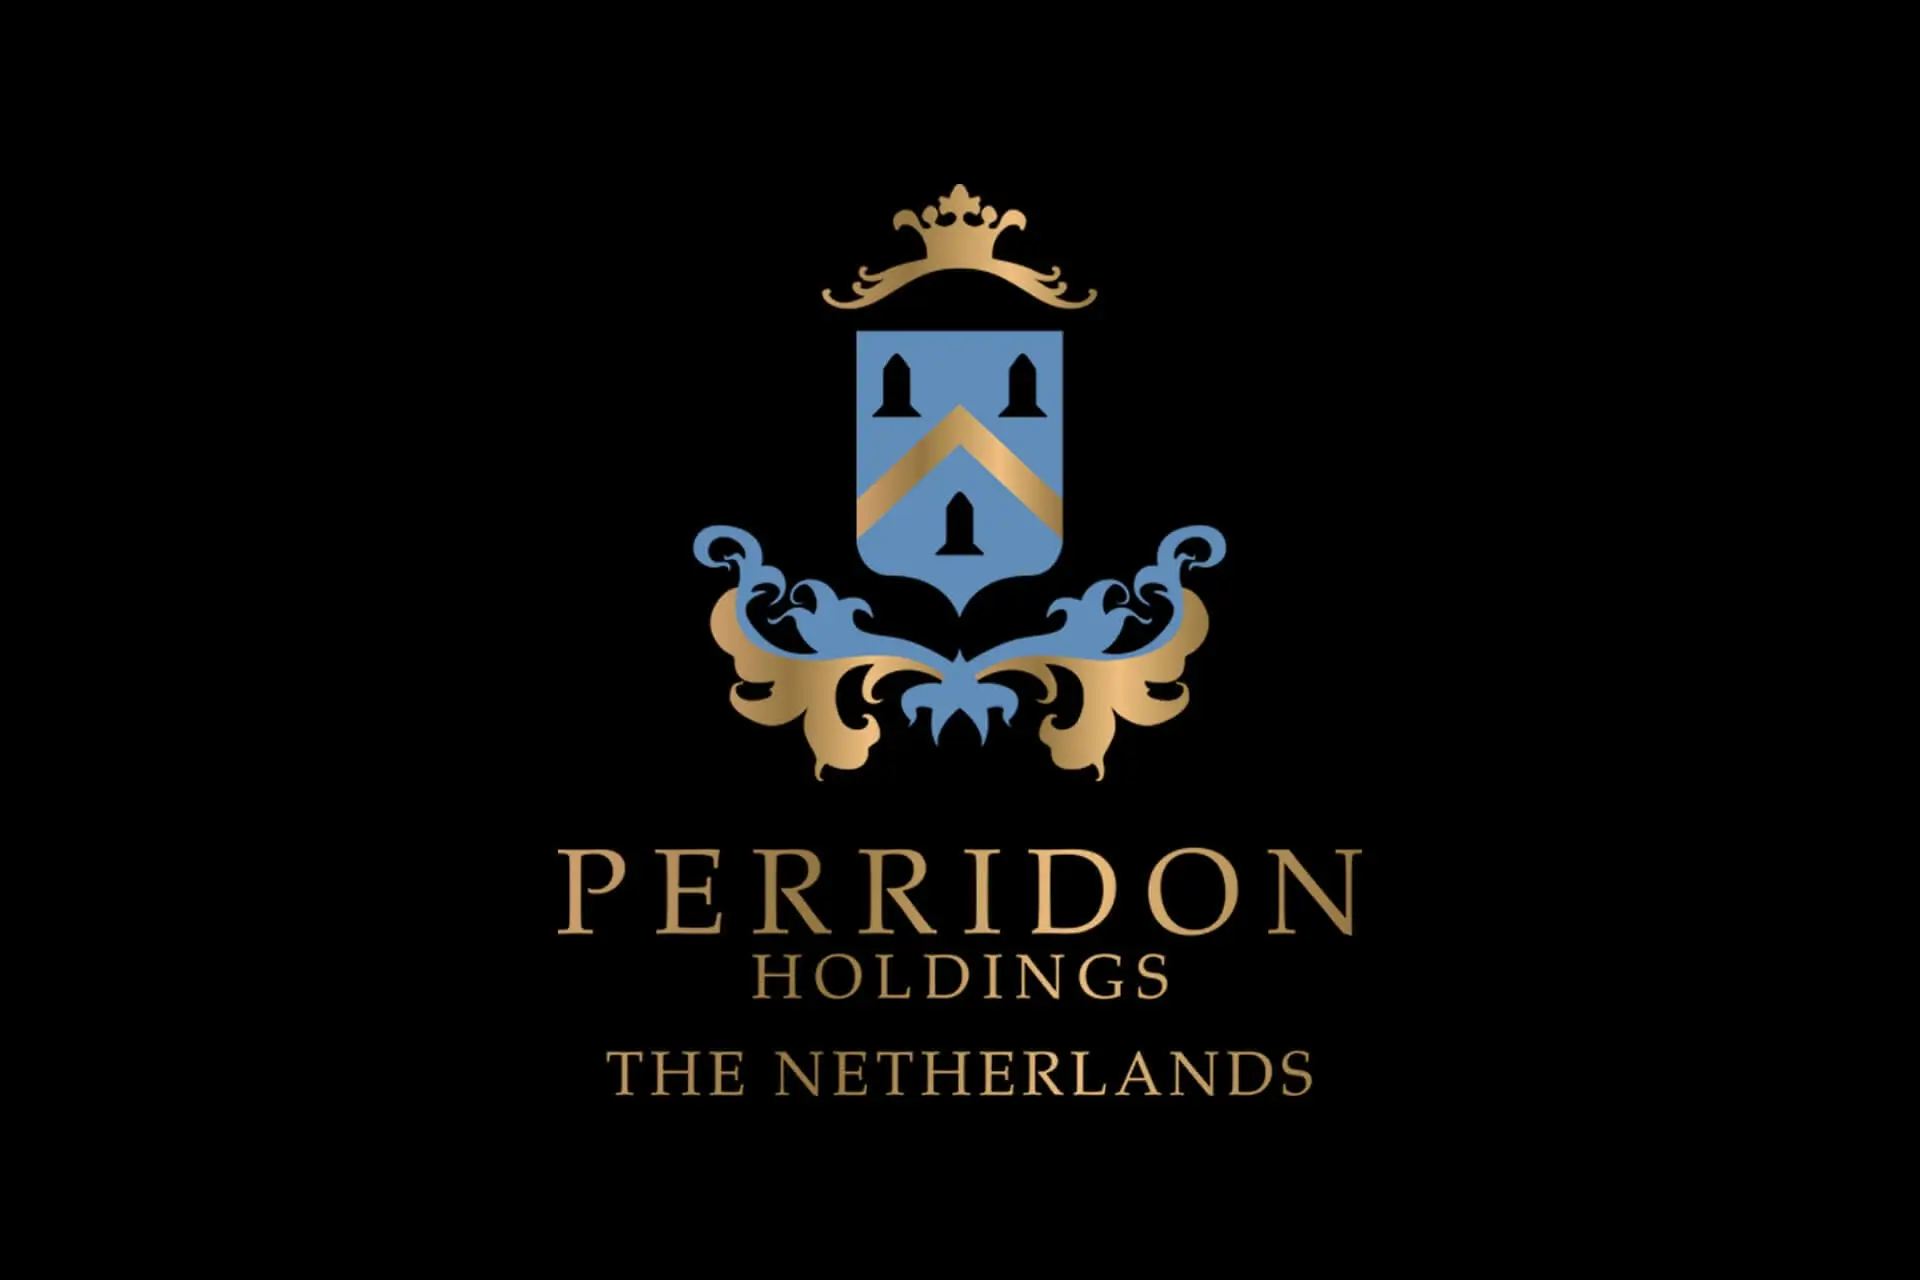 Perridon Holdings The Netherlands